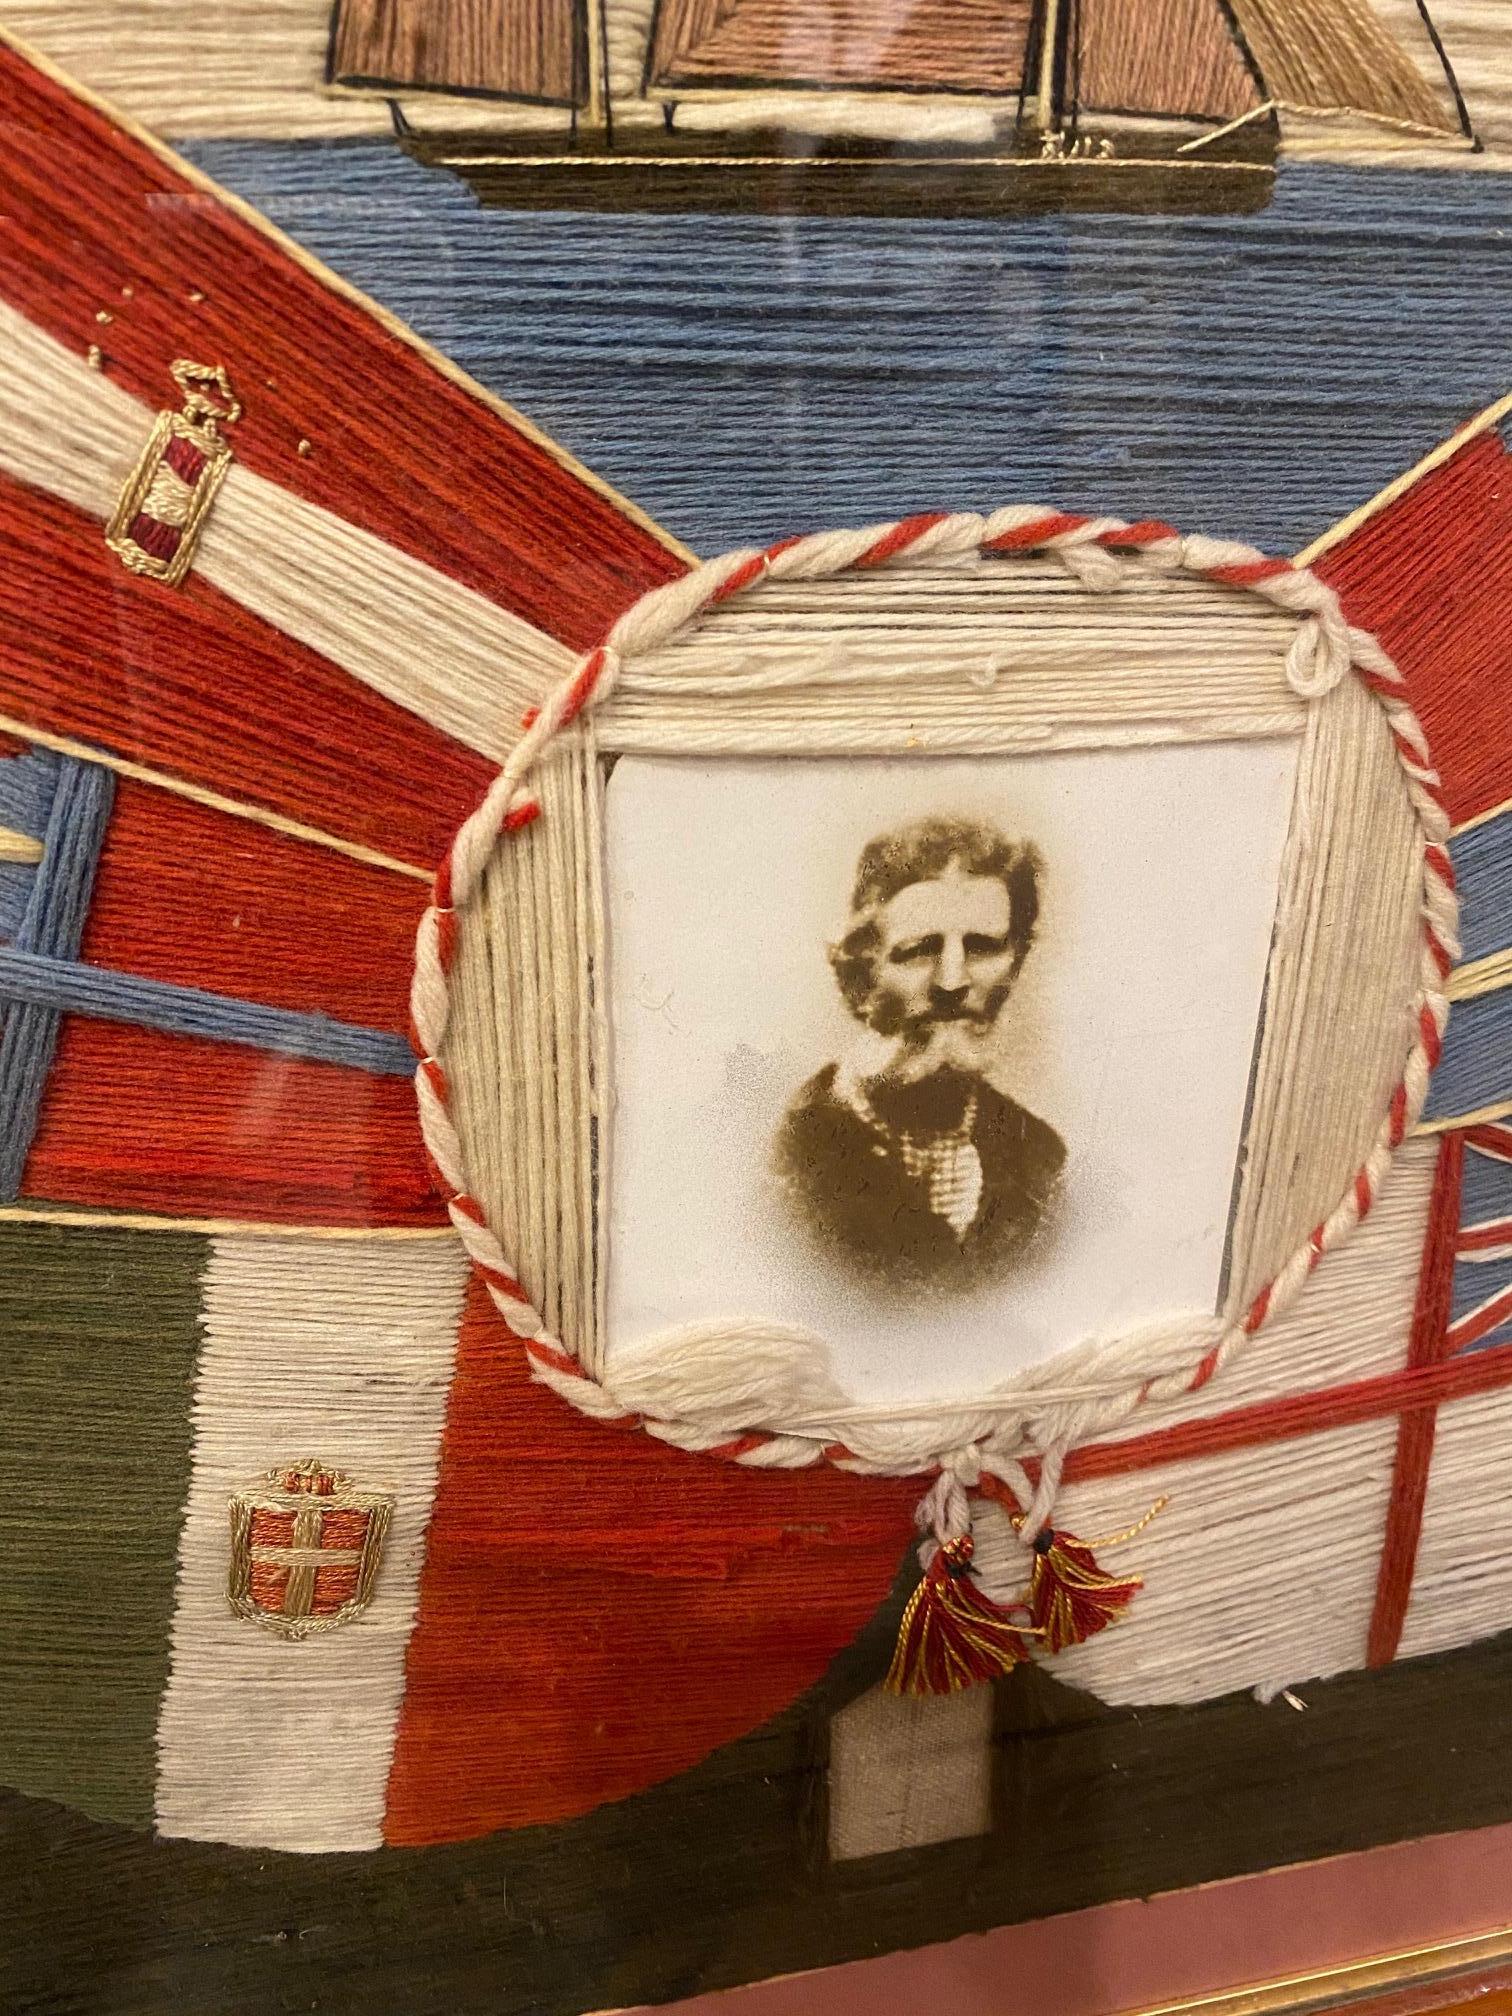 Very unusual 19th century matched pair of sailor's Yachting Woolies, circa 1870, a true pair of woolworks featuring mirror images of the same Yawl rigged yacht, and period photographs of the husband and wife sailors surrounded by the flags of all